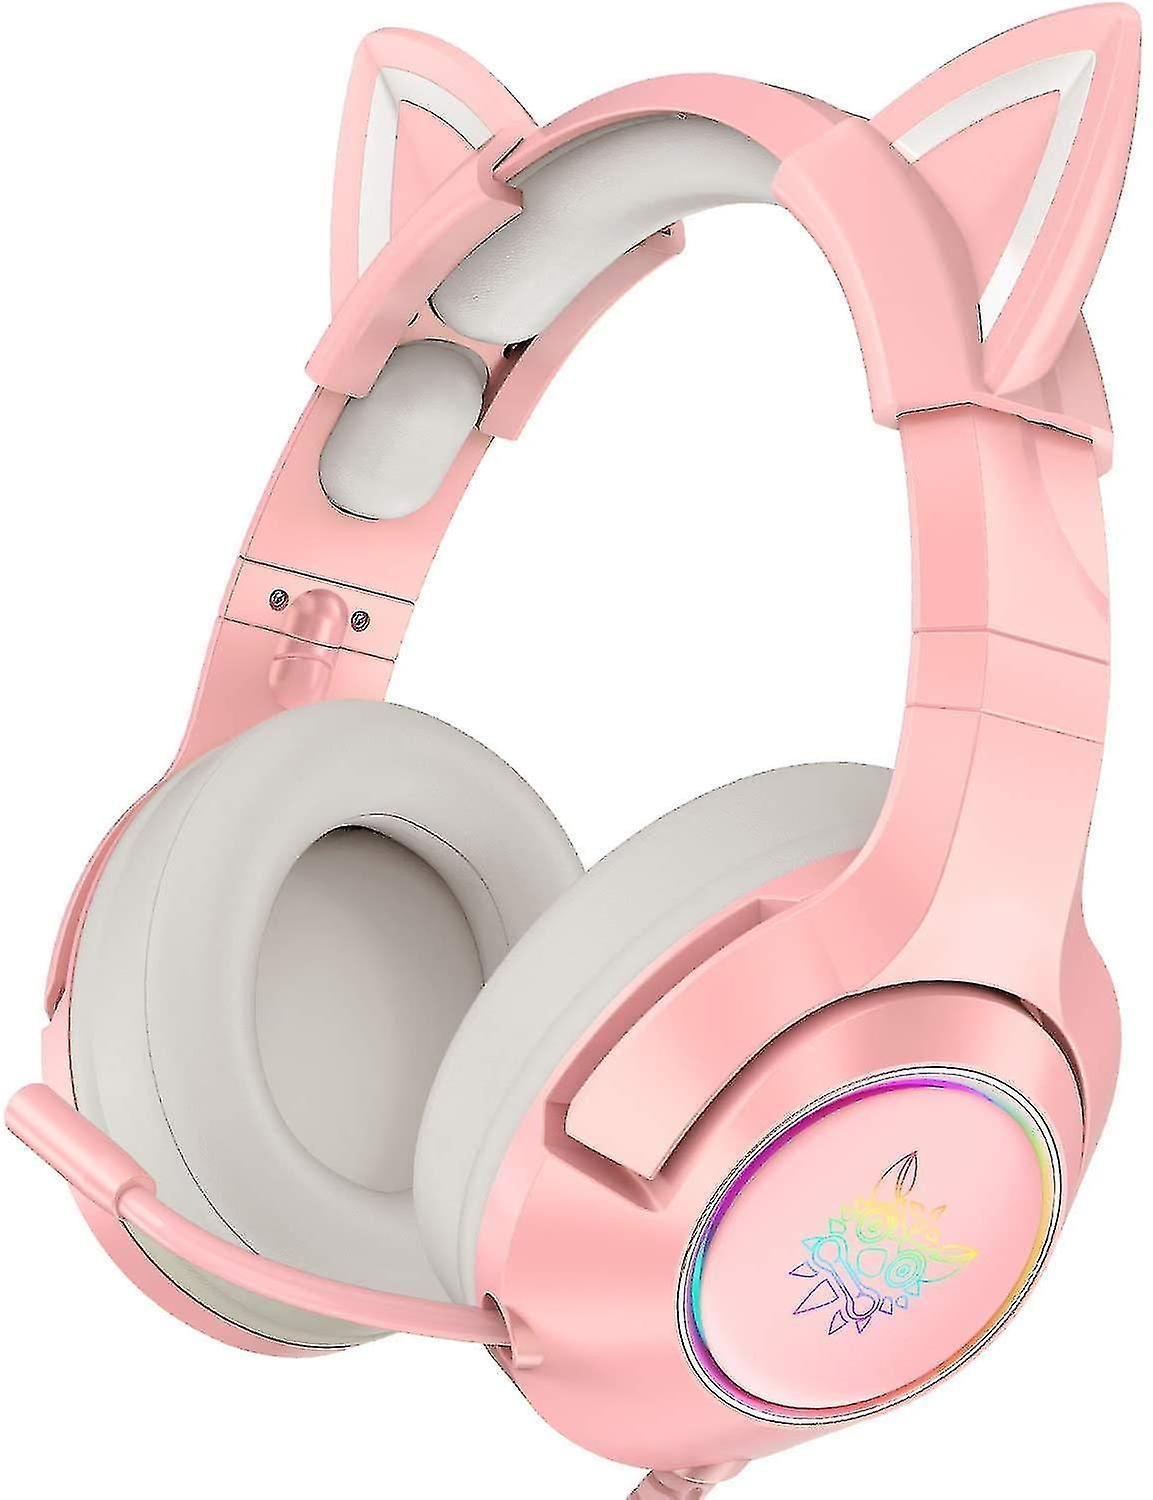 K9 Cat Ear Headset For Xbox One, Ps4, Ps5, Pc pink